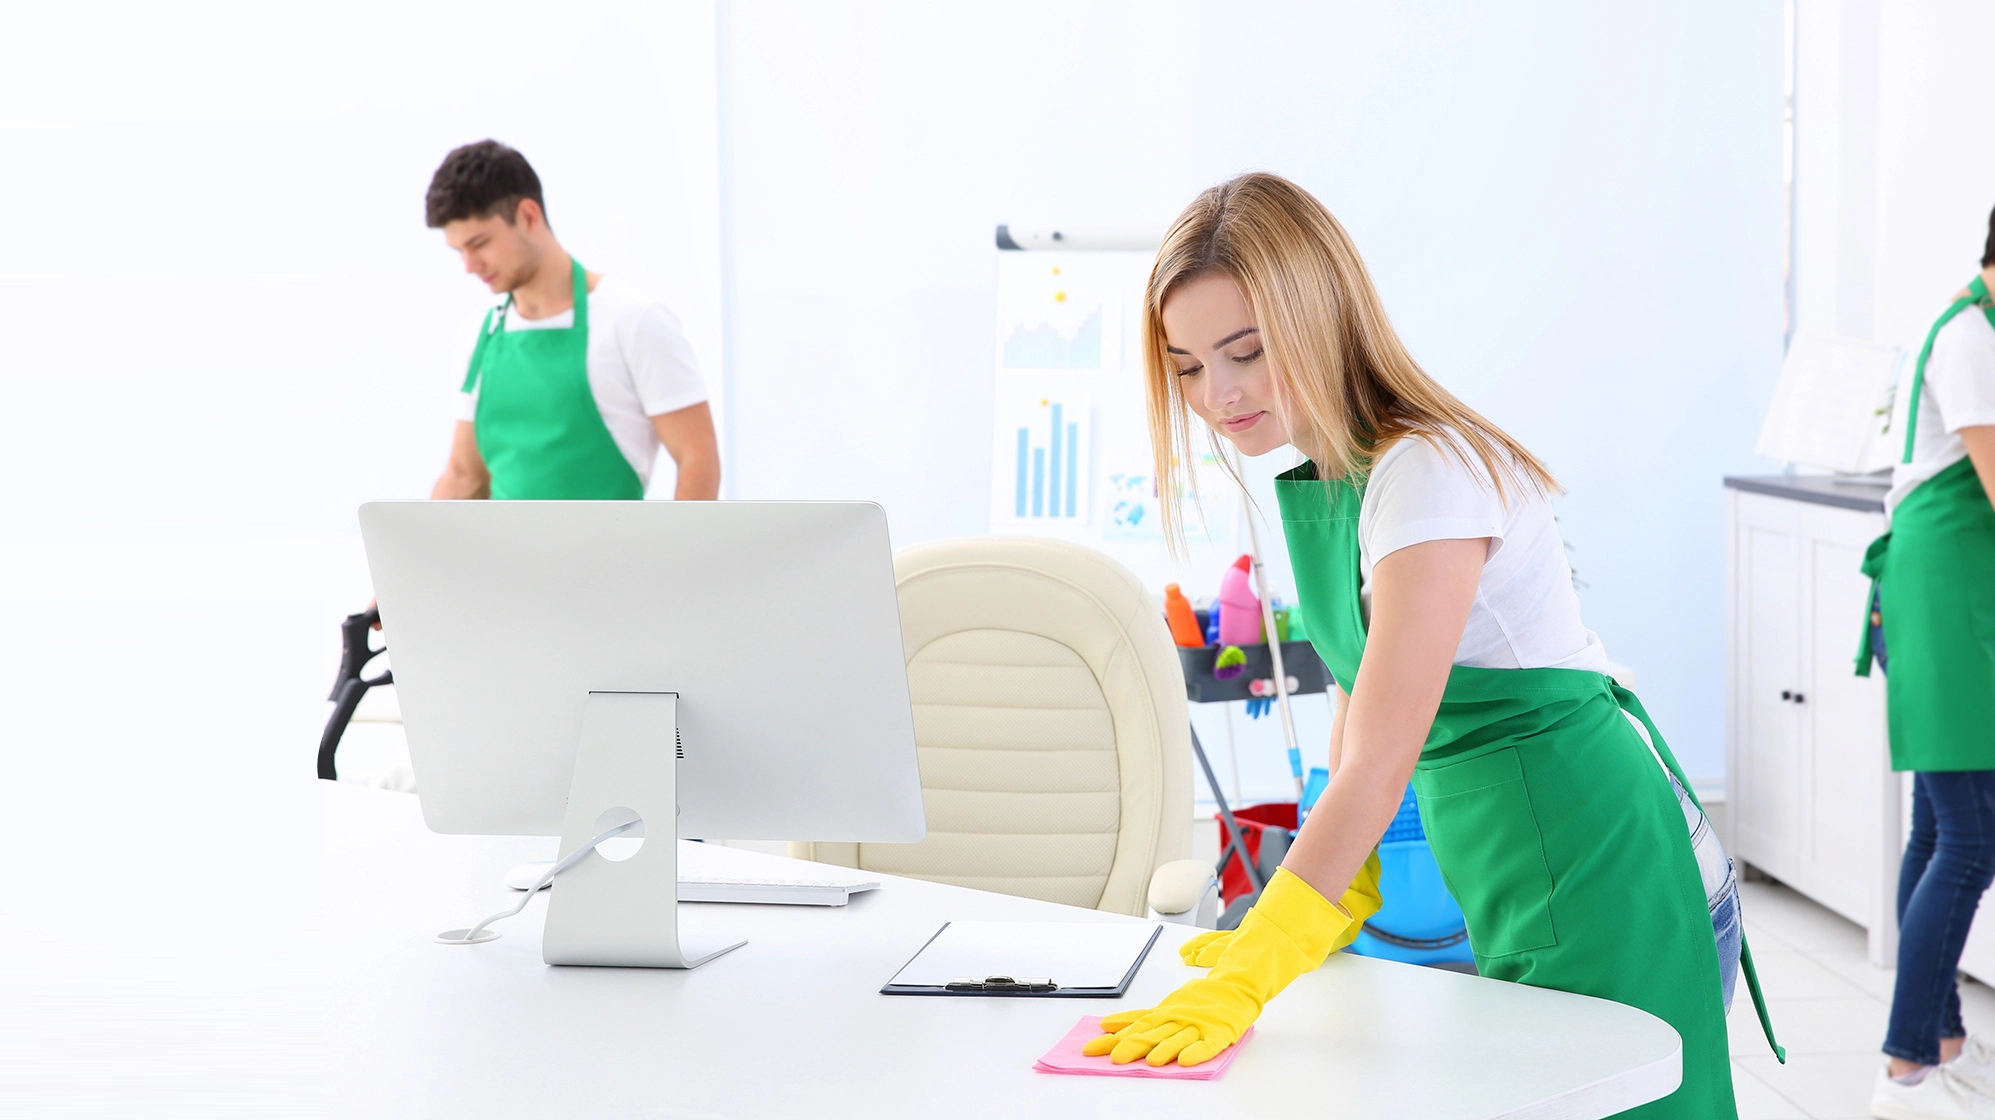 office cleaning services in Dubai